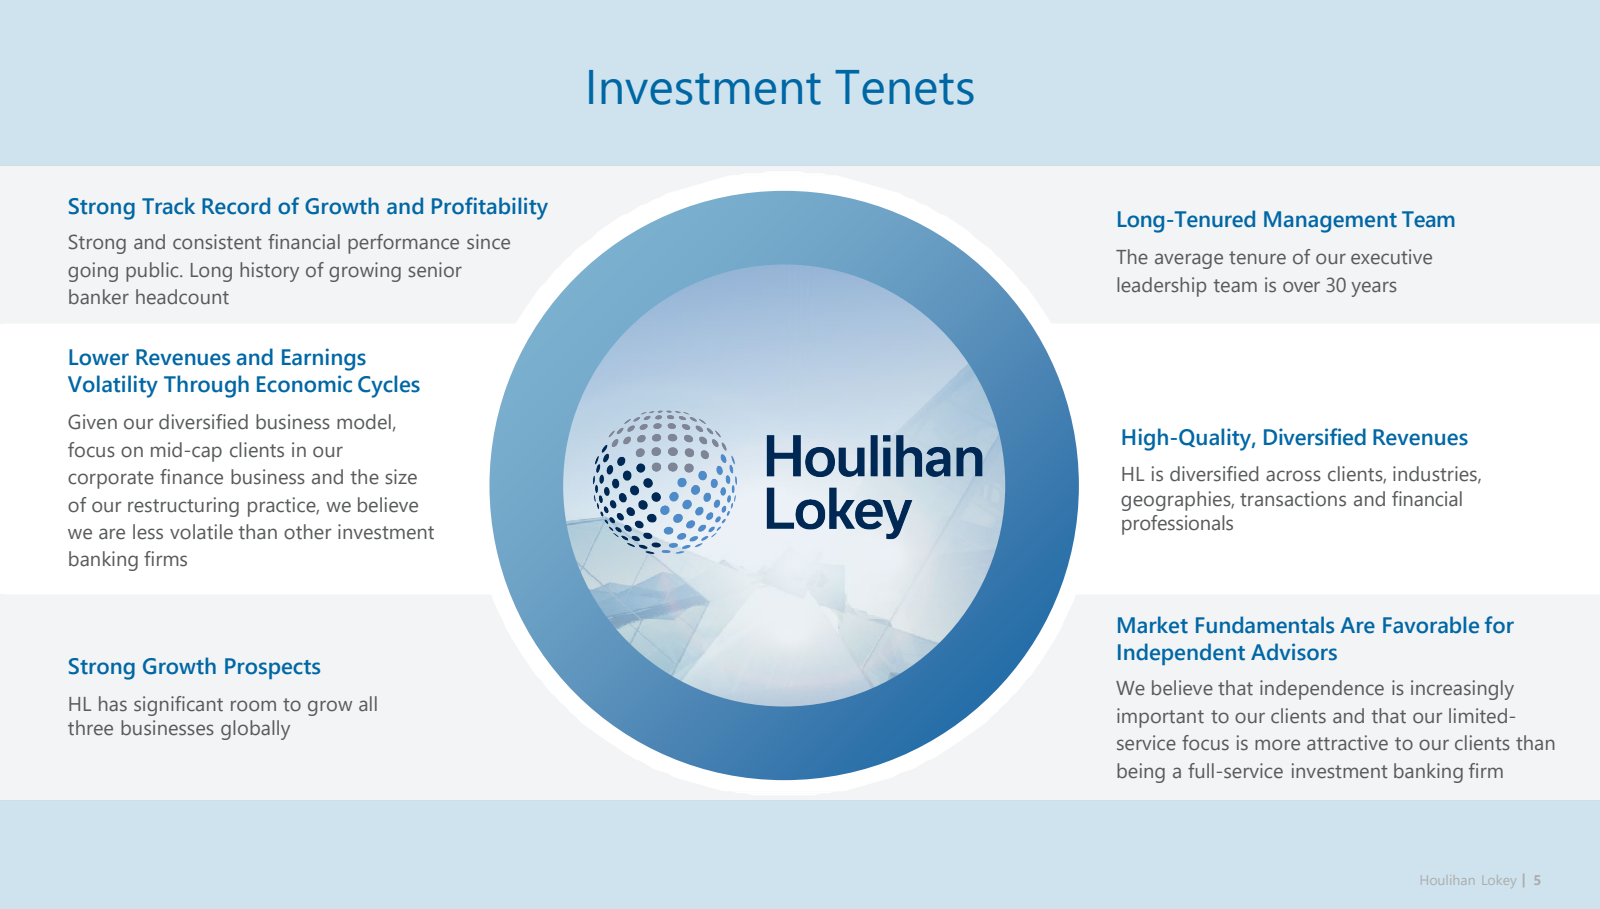 Investment Tenets 

